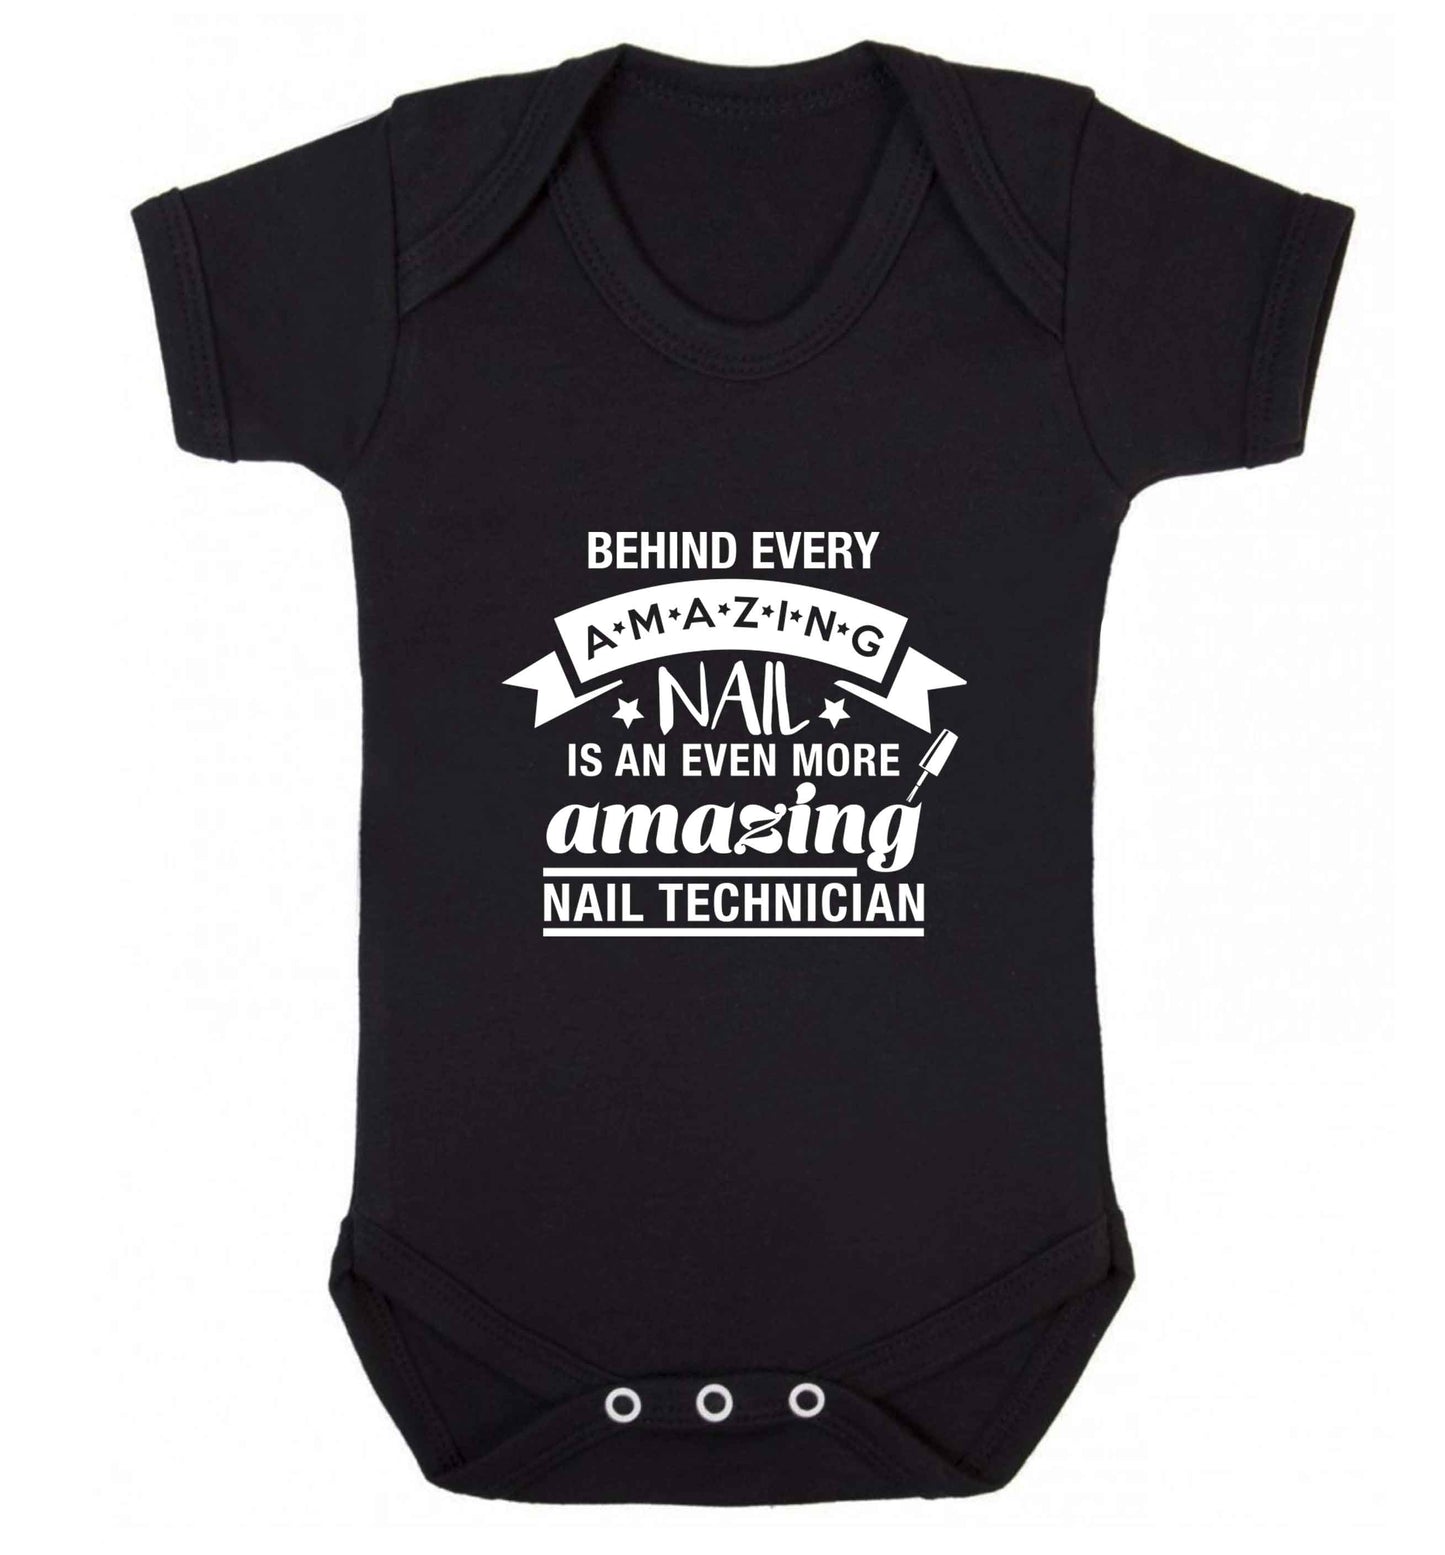 Behind every amazing nail is an even more amazing nail technician baby vest black 18-24 months